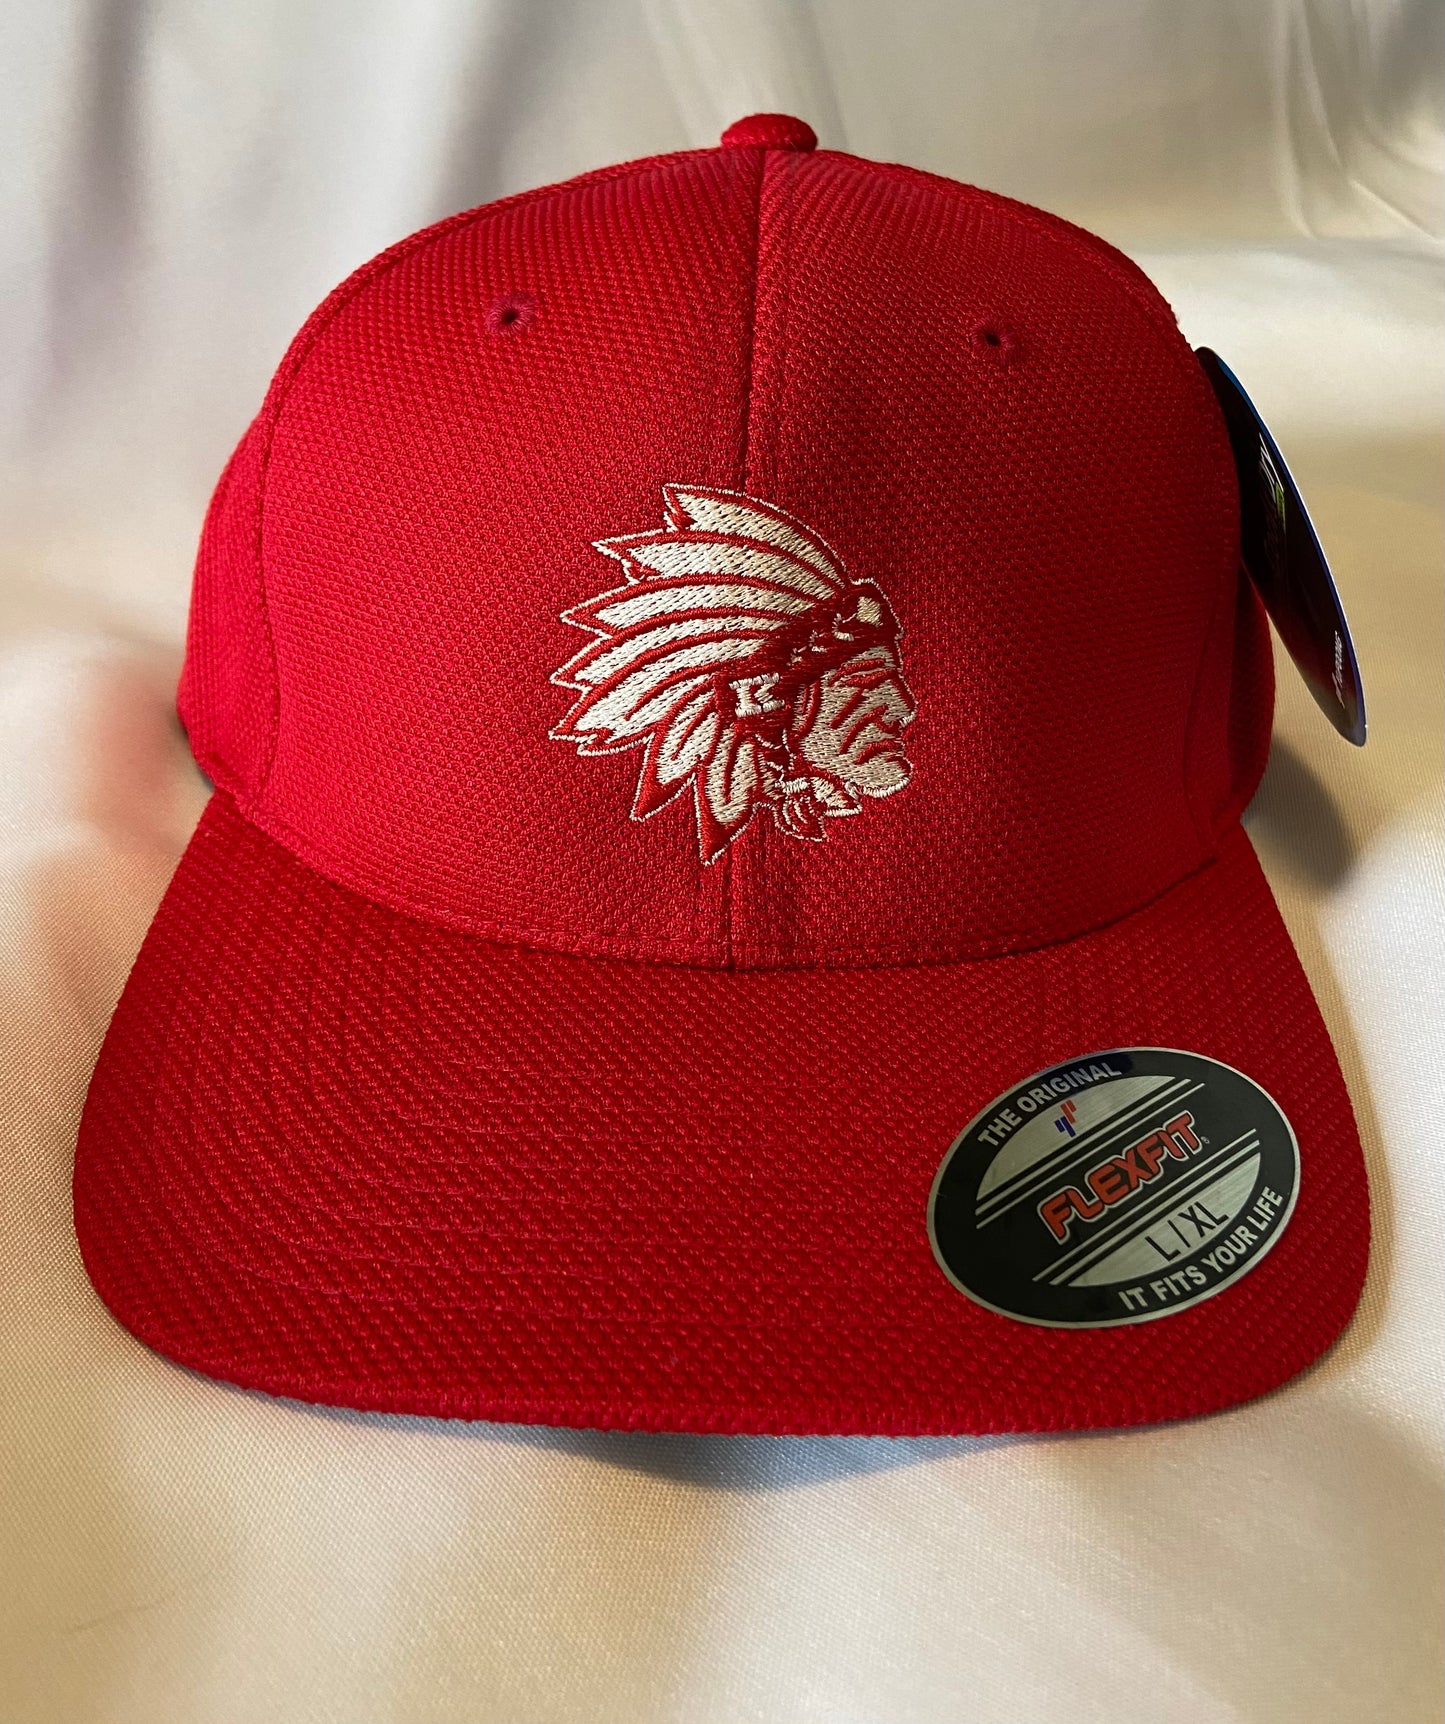 Knox Redskins Embroidered FlexFit Baseball Hat - Fitted cap S/M or L/XL - Red